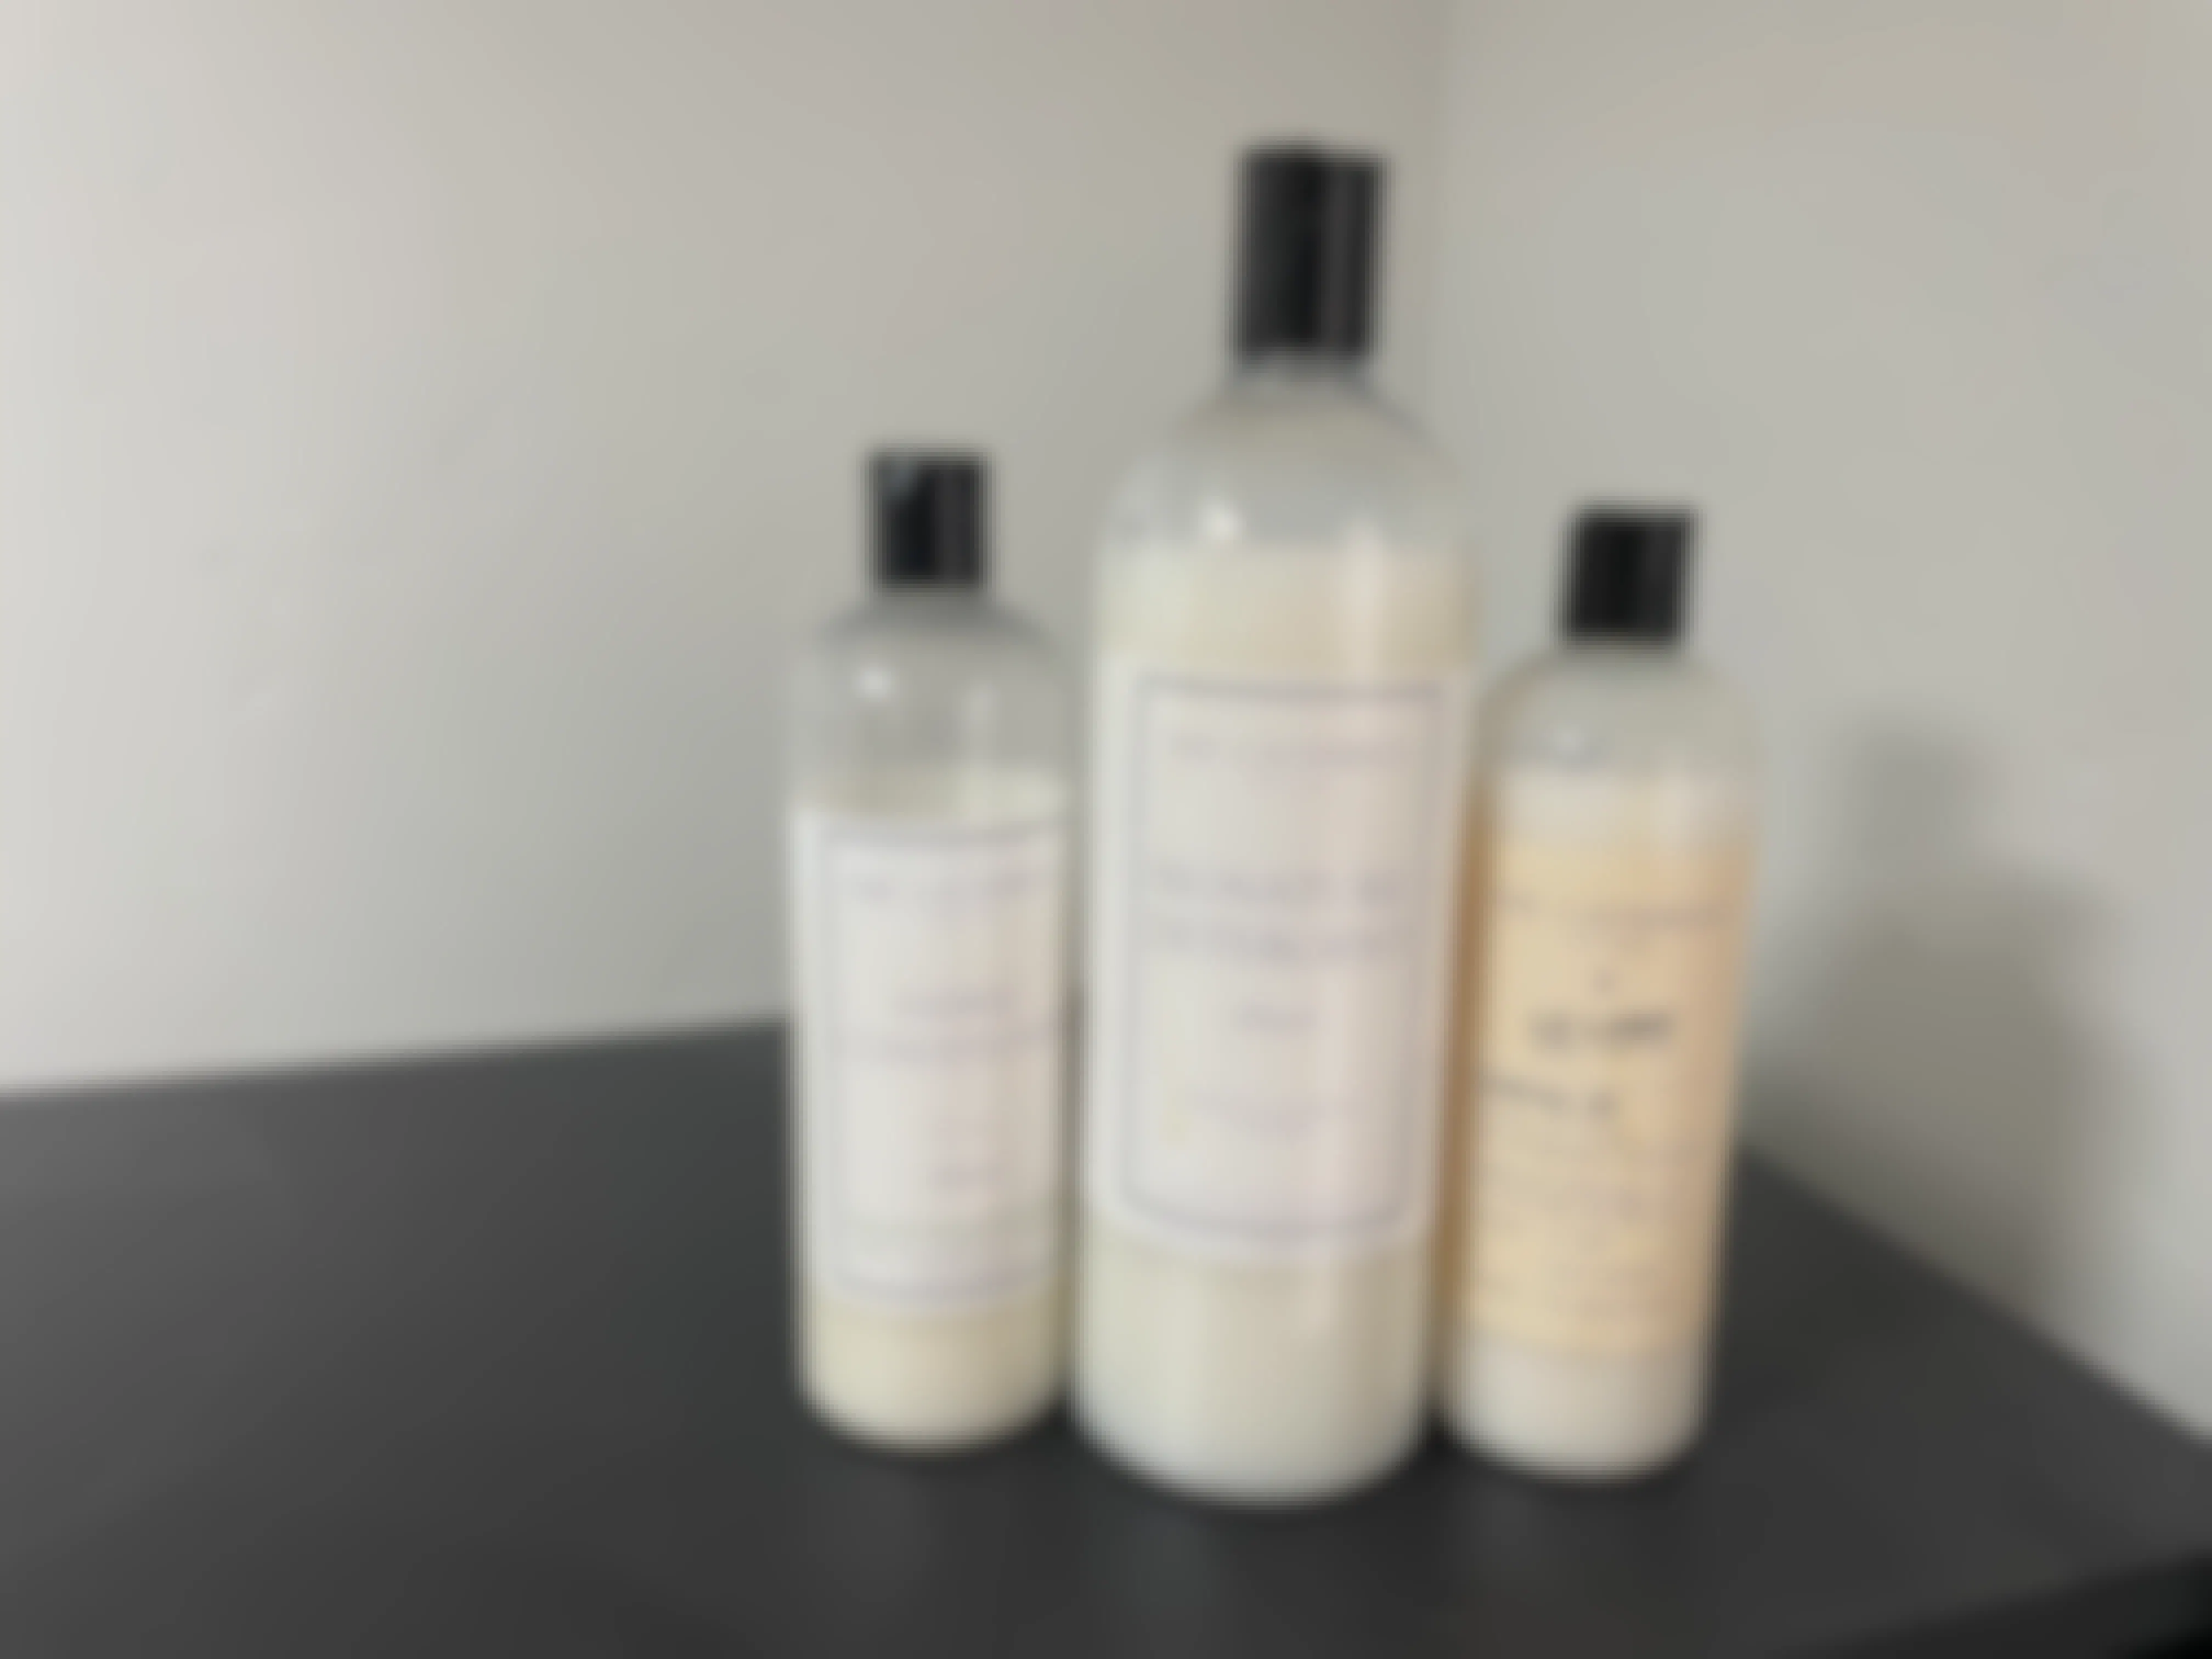 Three bottles of The Laundress recalled in late 2022